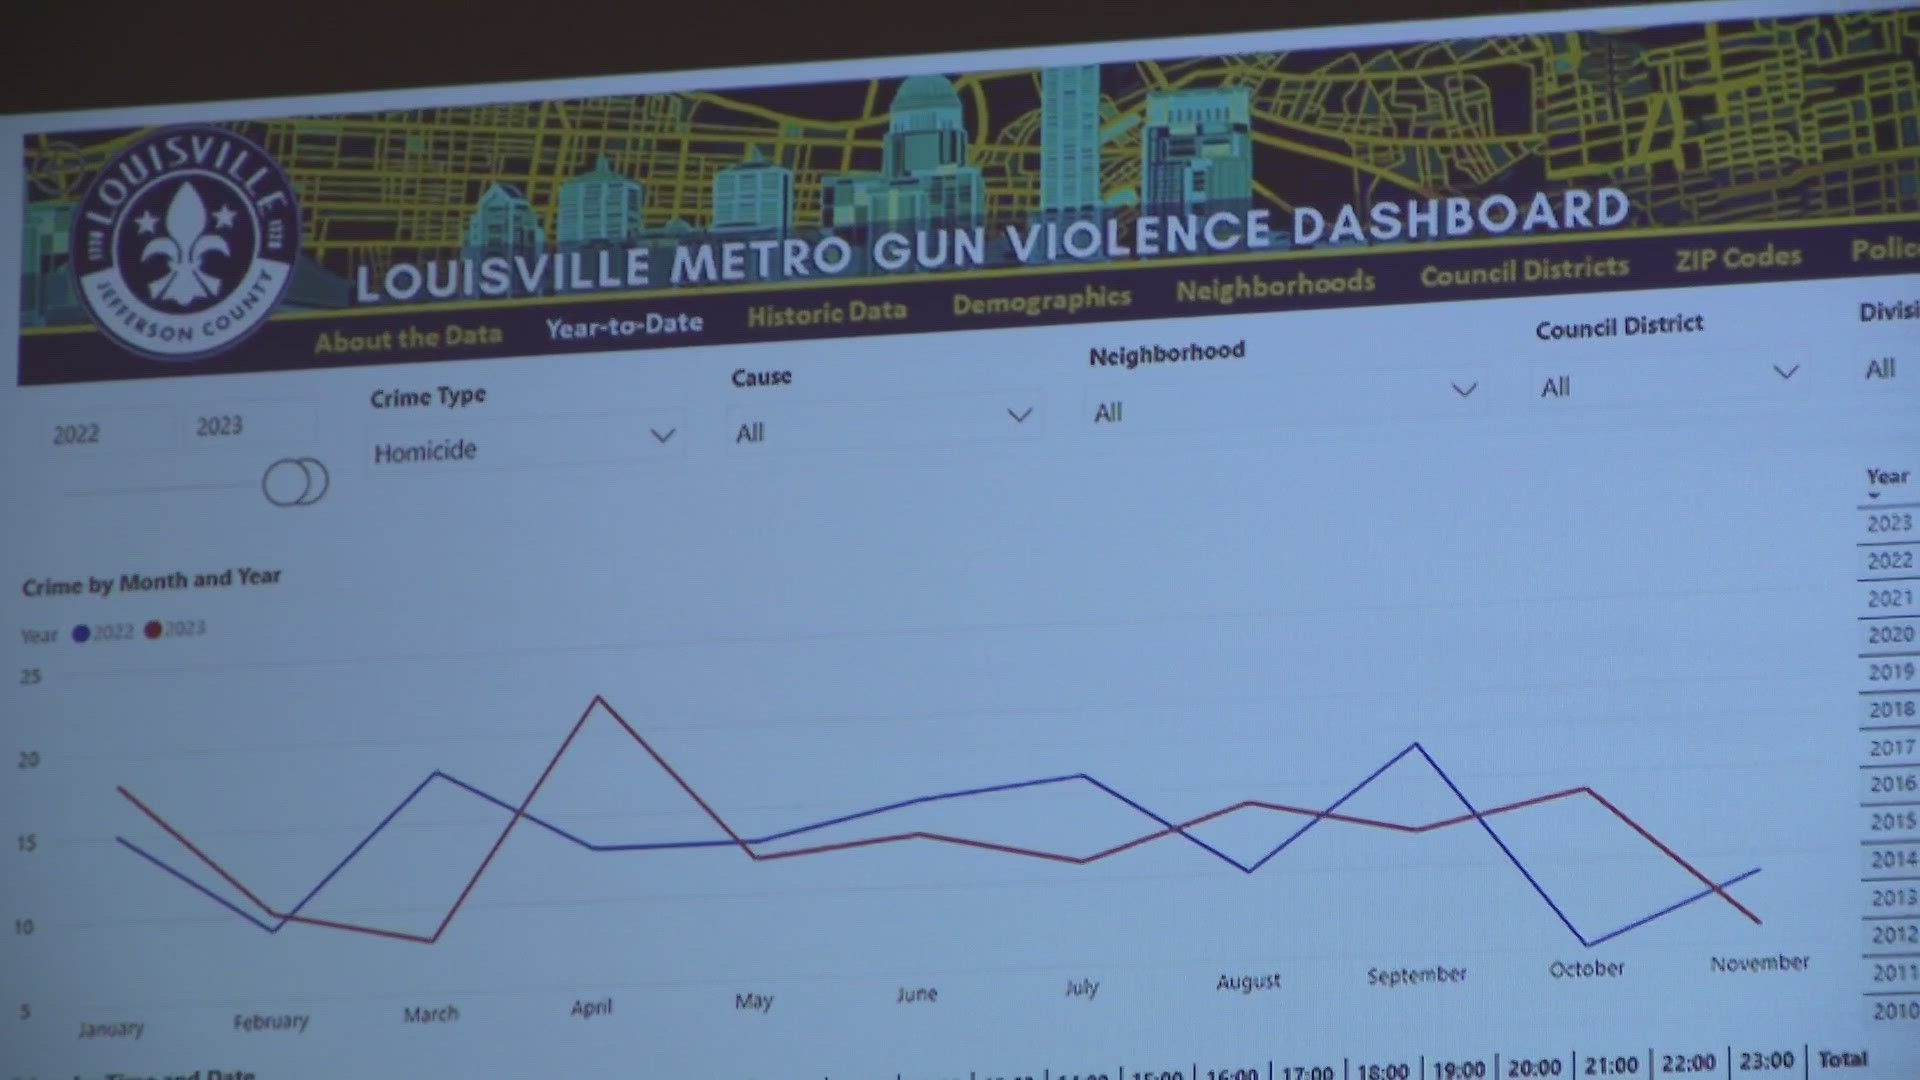 The dashboard is an easily accessible tool community groups can use to plan their responses to violence.